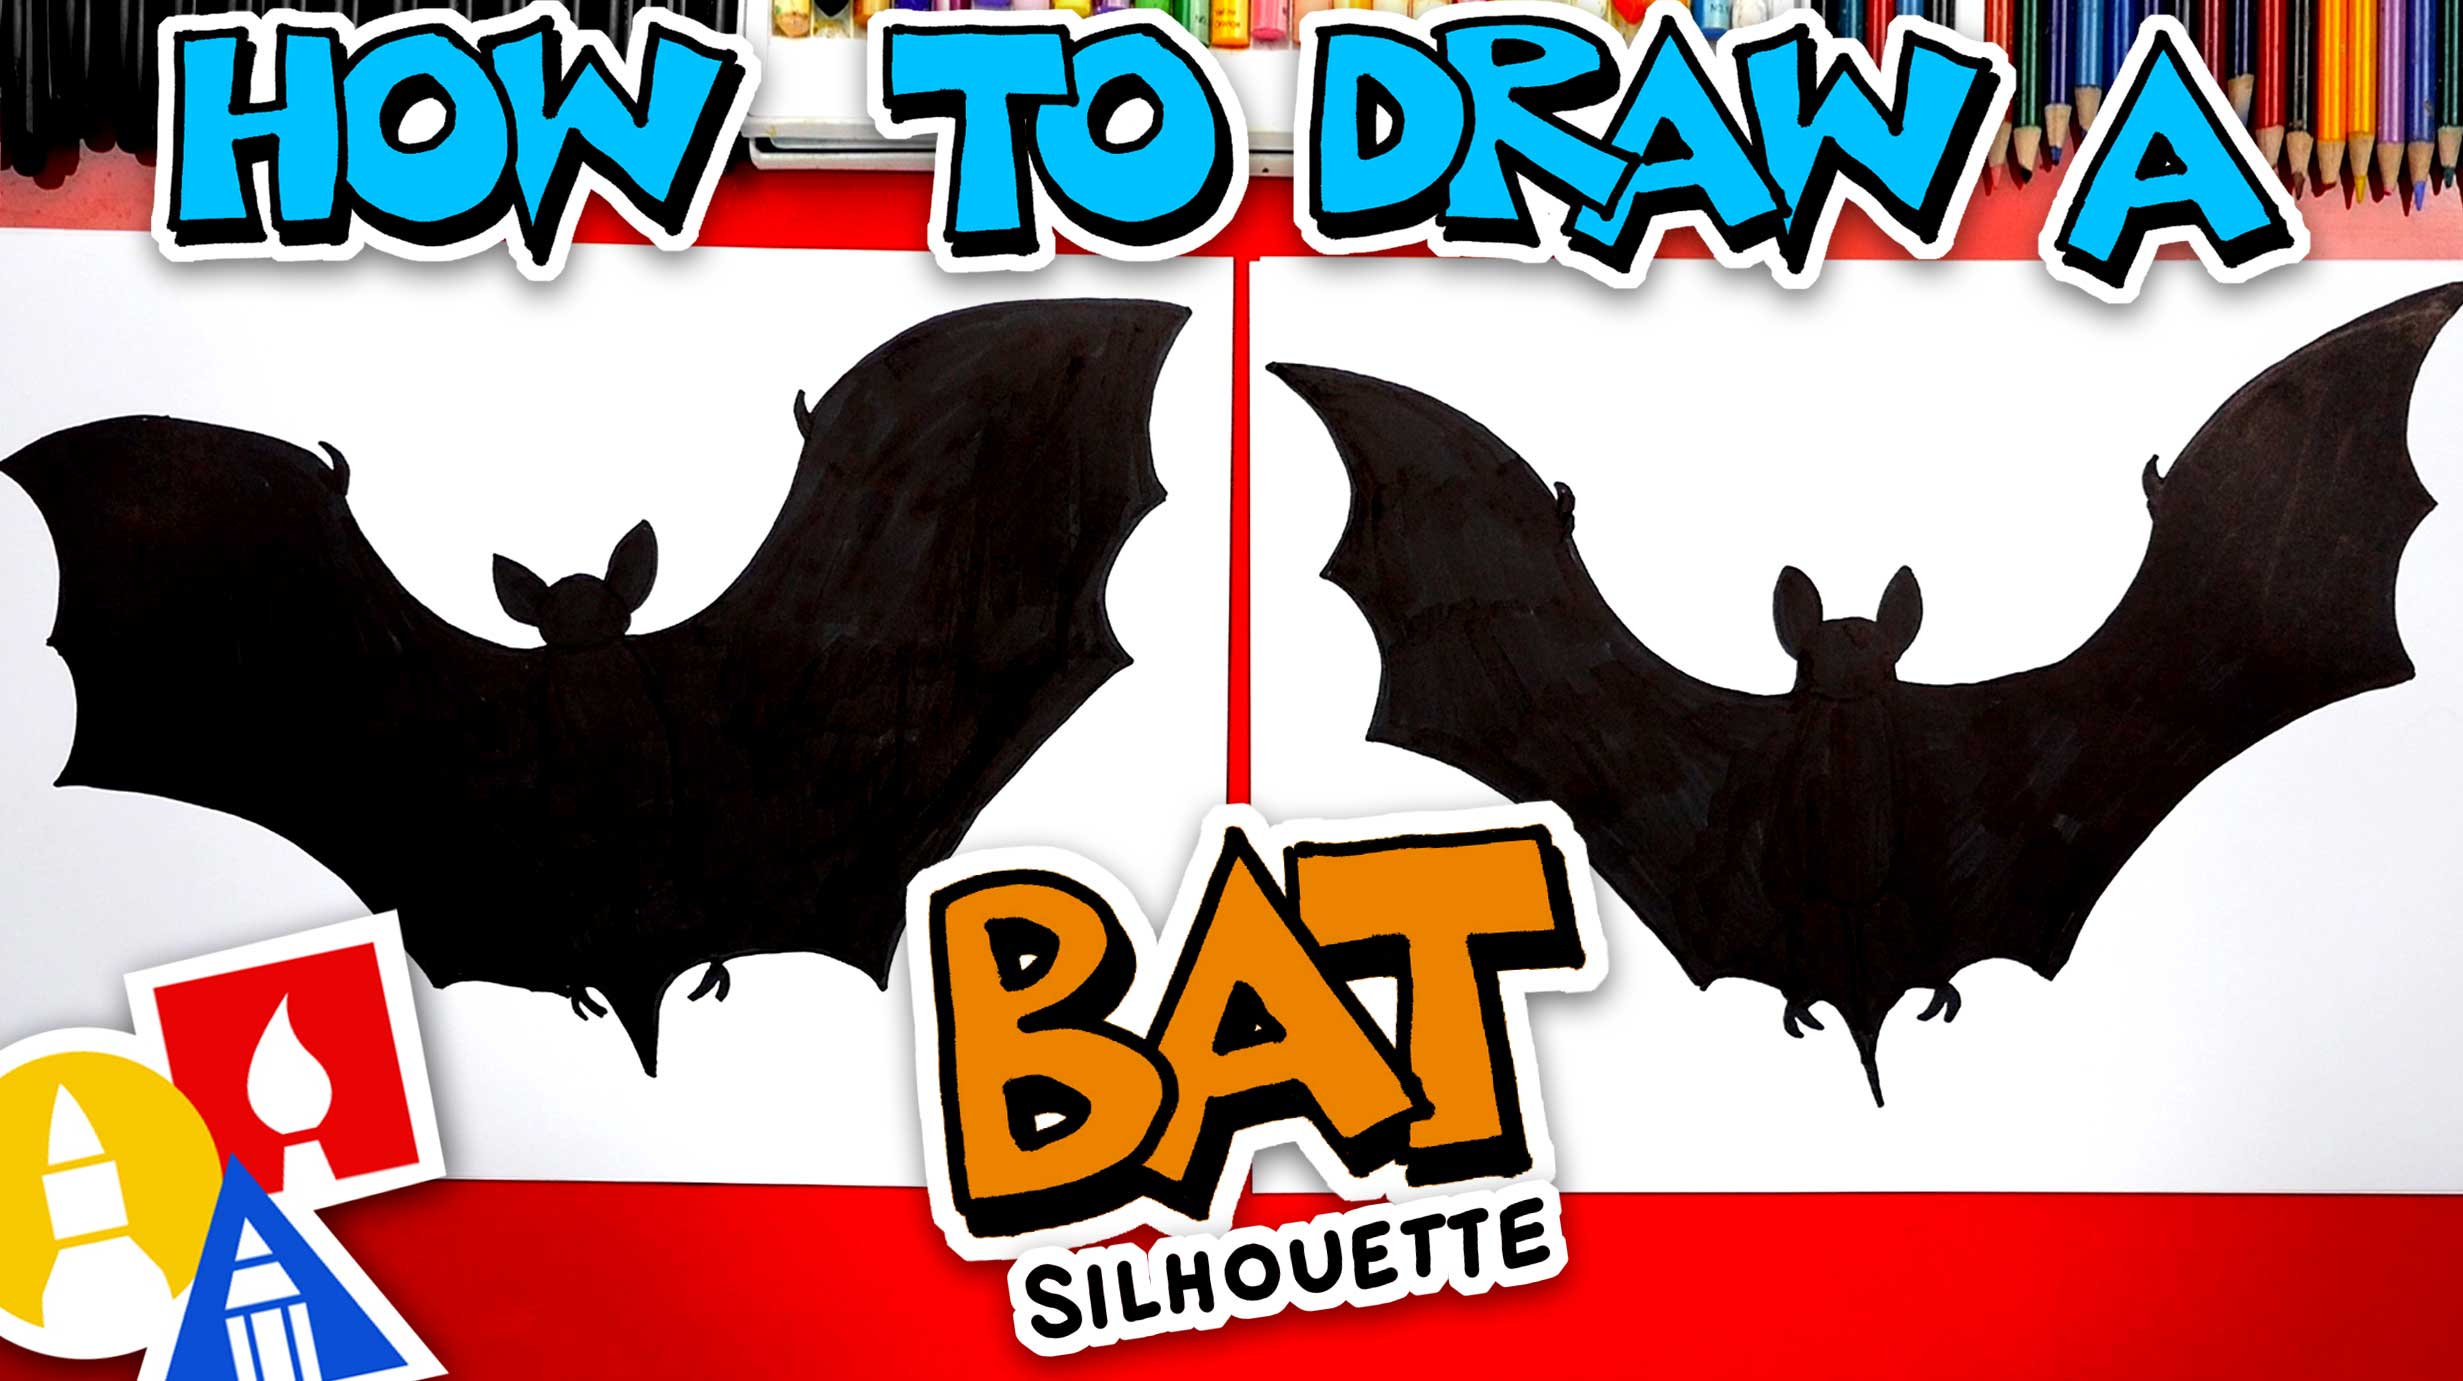 How To Draw A Cool Bat Silhouette - Art For Kids Hub